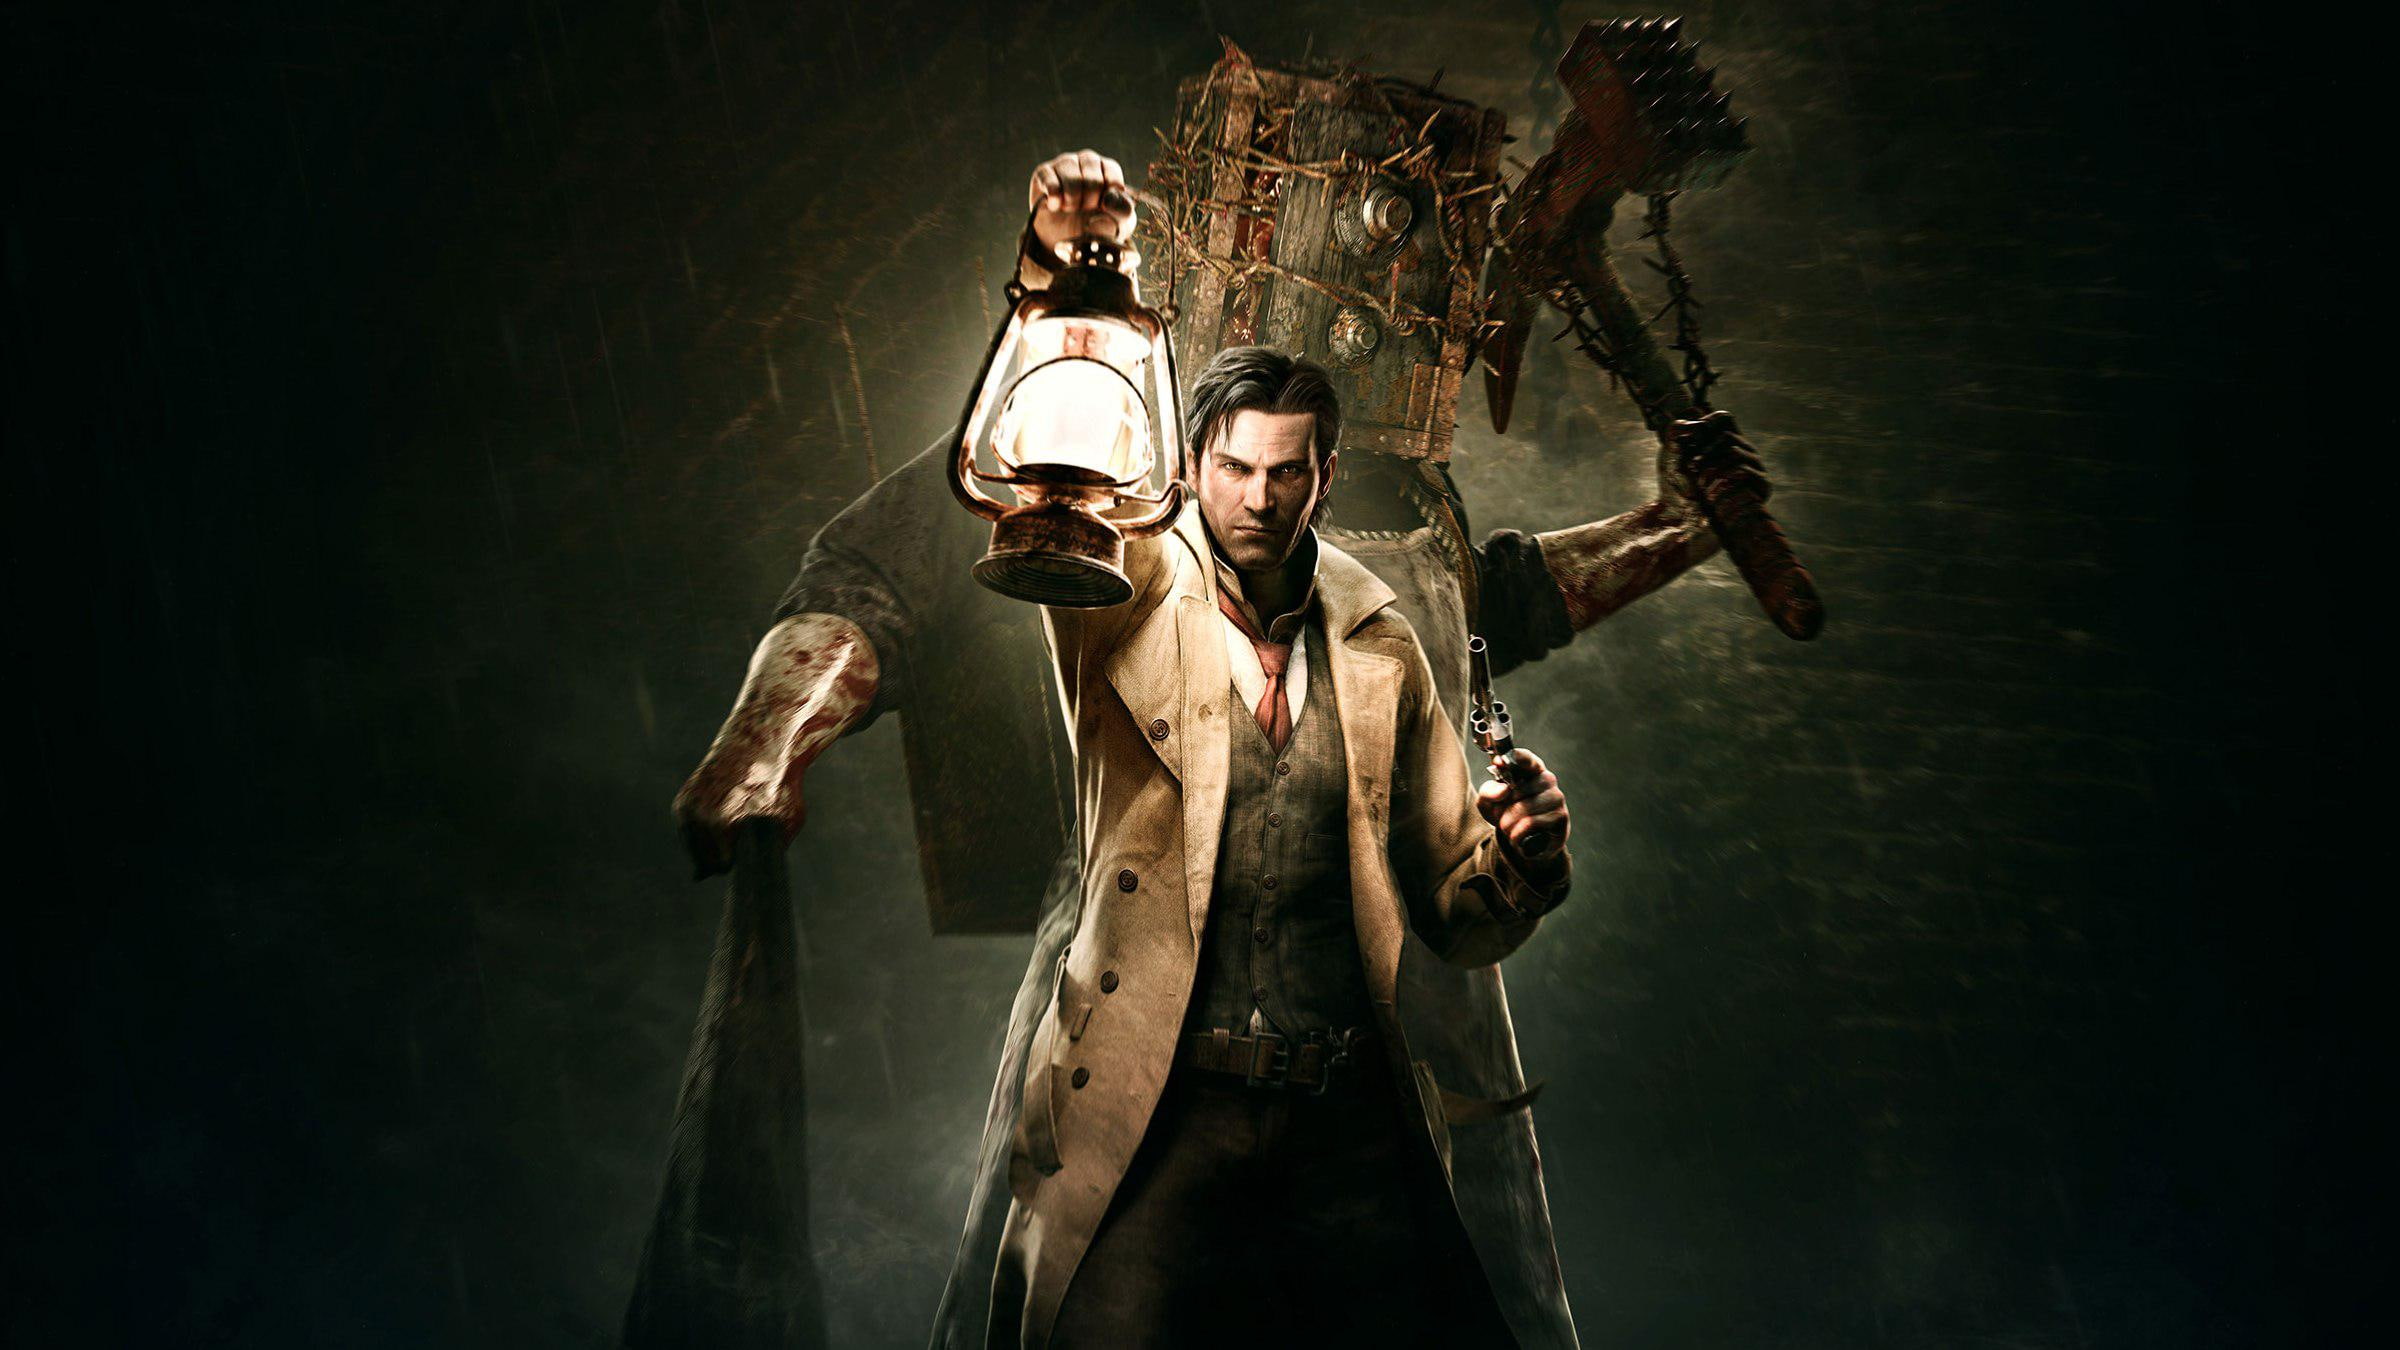 The Evil Within Screenshots, games